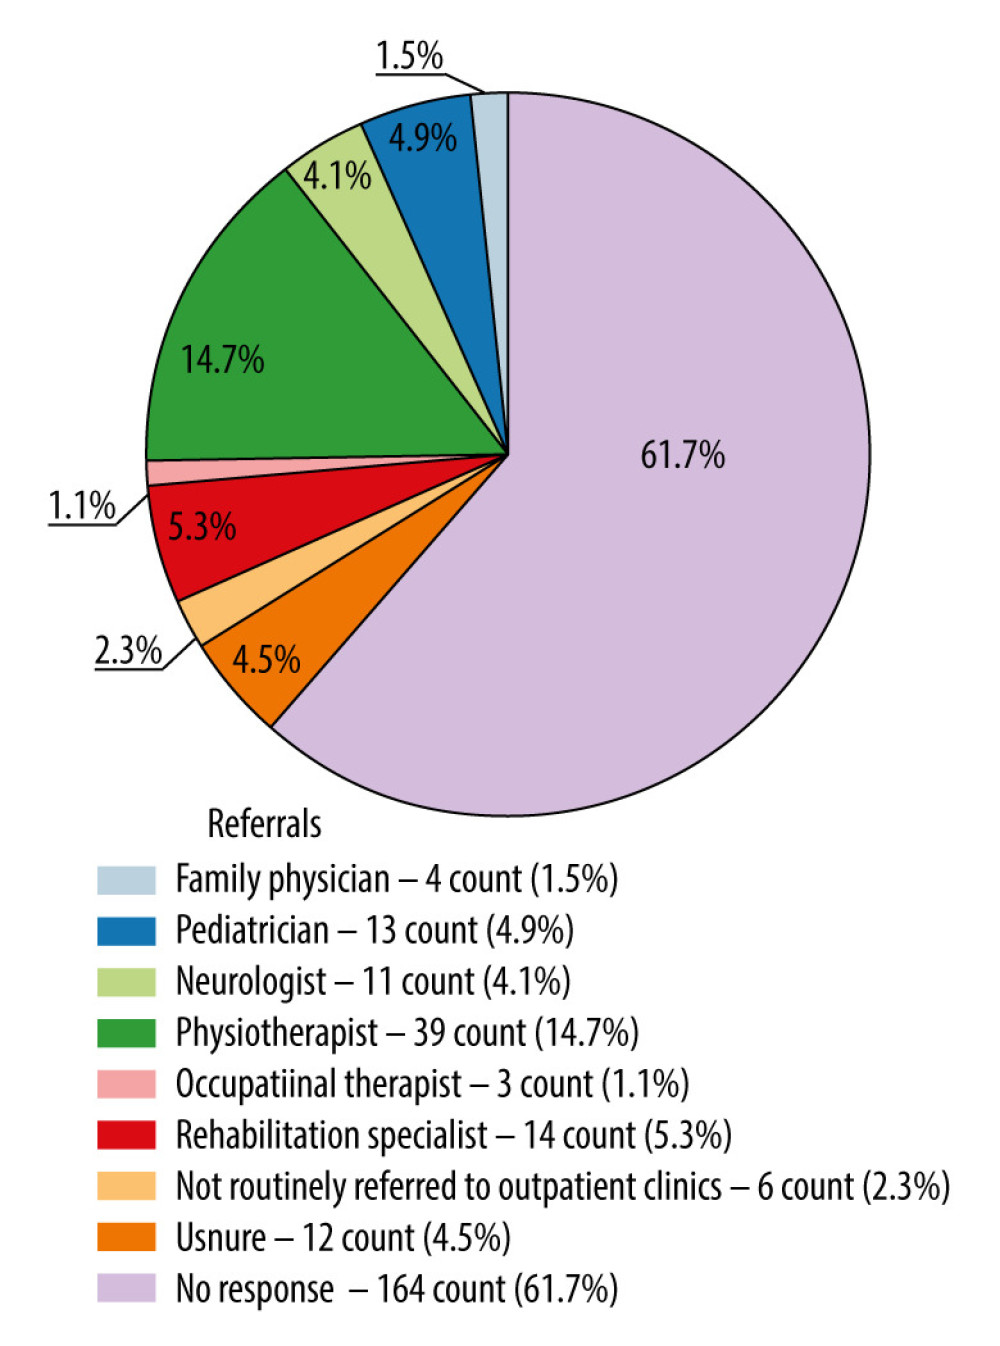 Pie chart representing the distribution of referrals for patients with suspected acquired weakness to various healthcare professionals. The chart is color-coded, and the legend includes both count and percentage, providing a clear and detailed description.